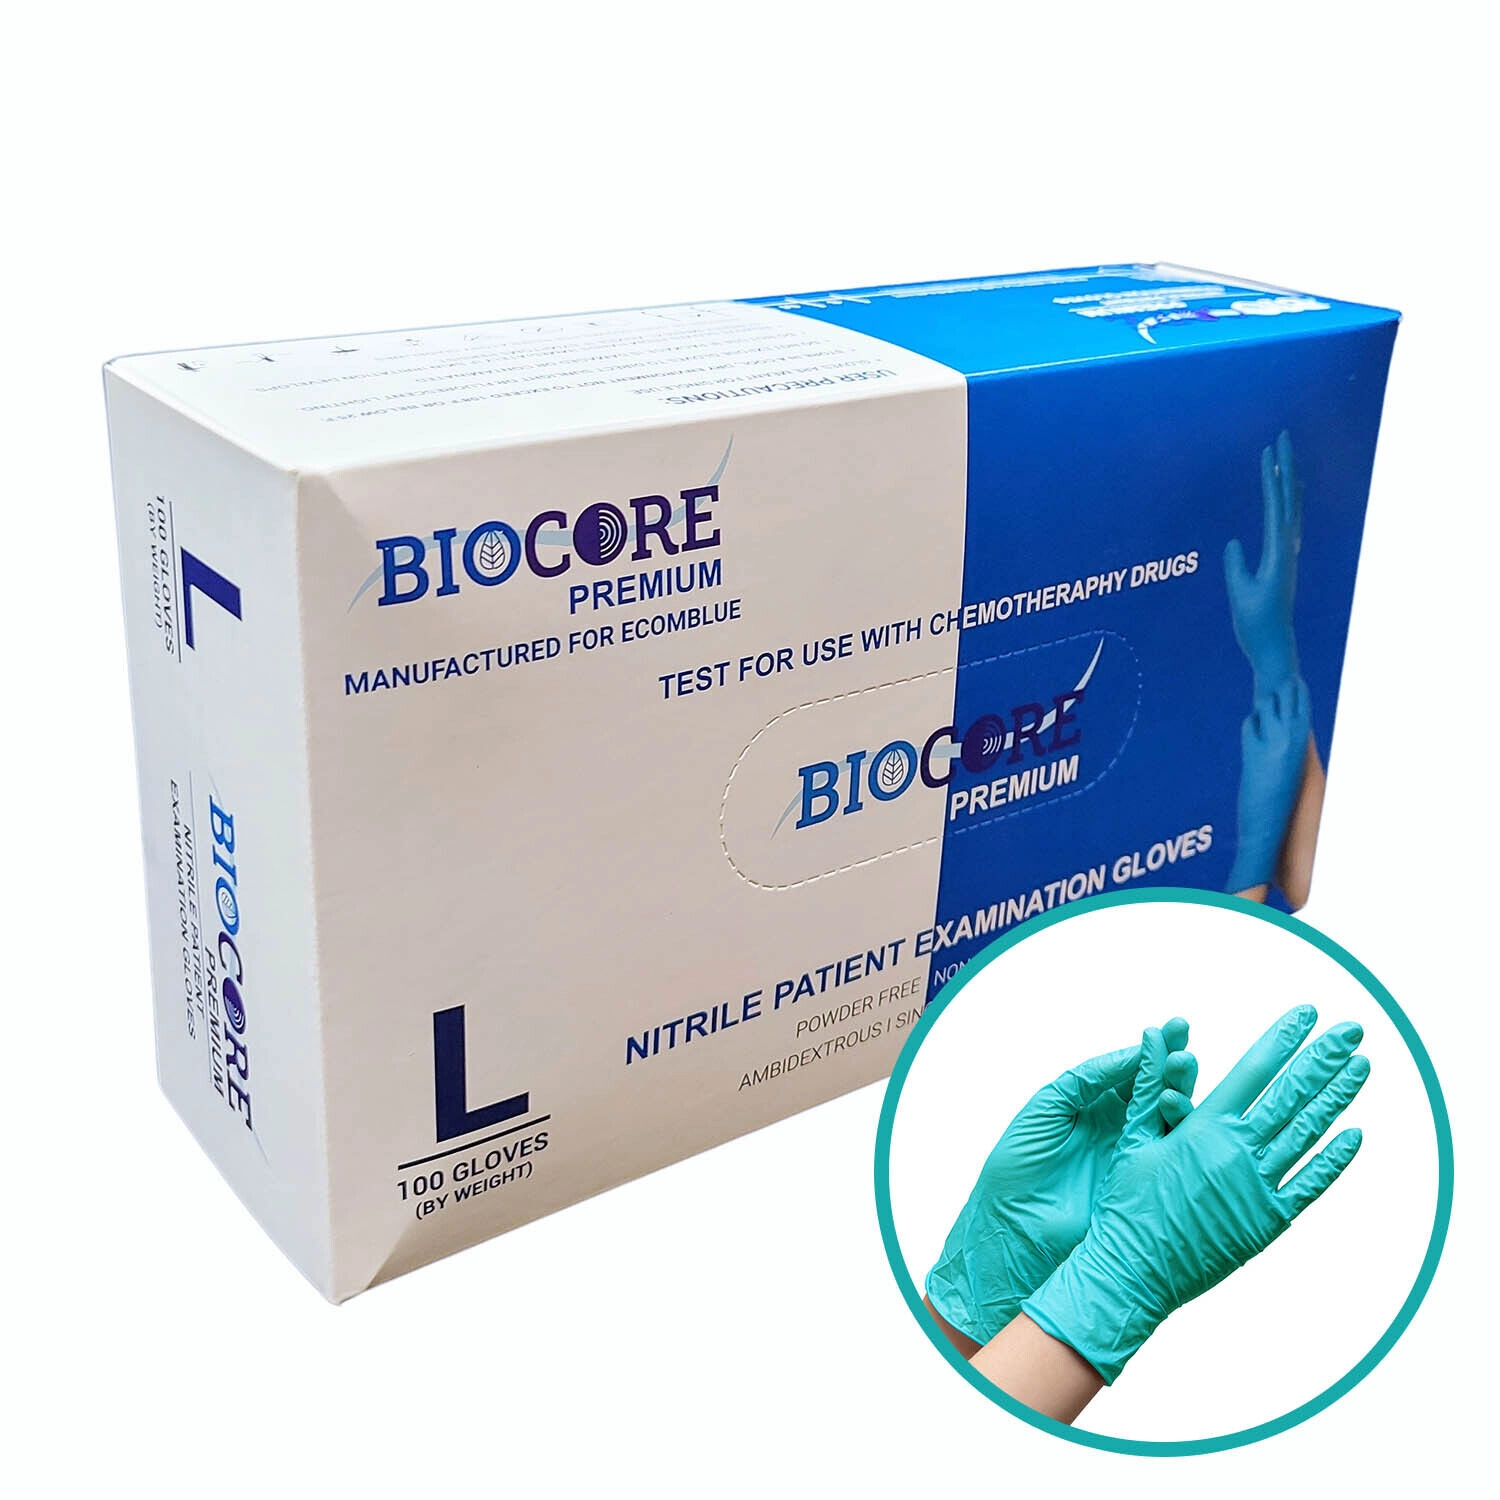 Nitrile Examination Gloves for Chemotherapy Drugs,